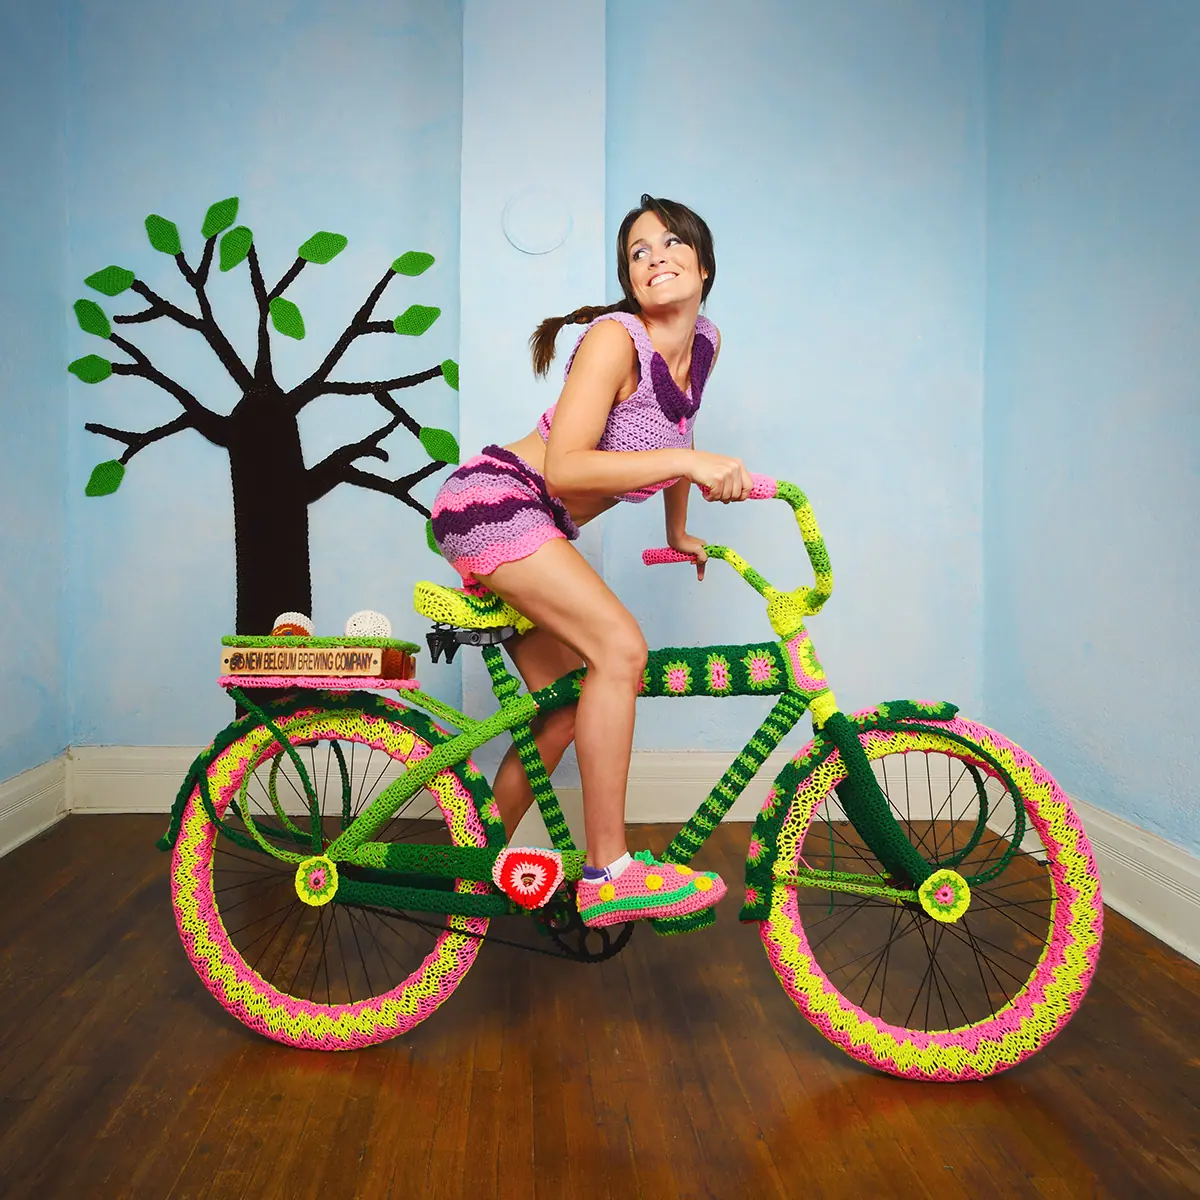 She Rides a Yarn Bombed Bicycle